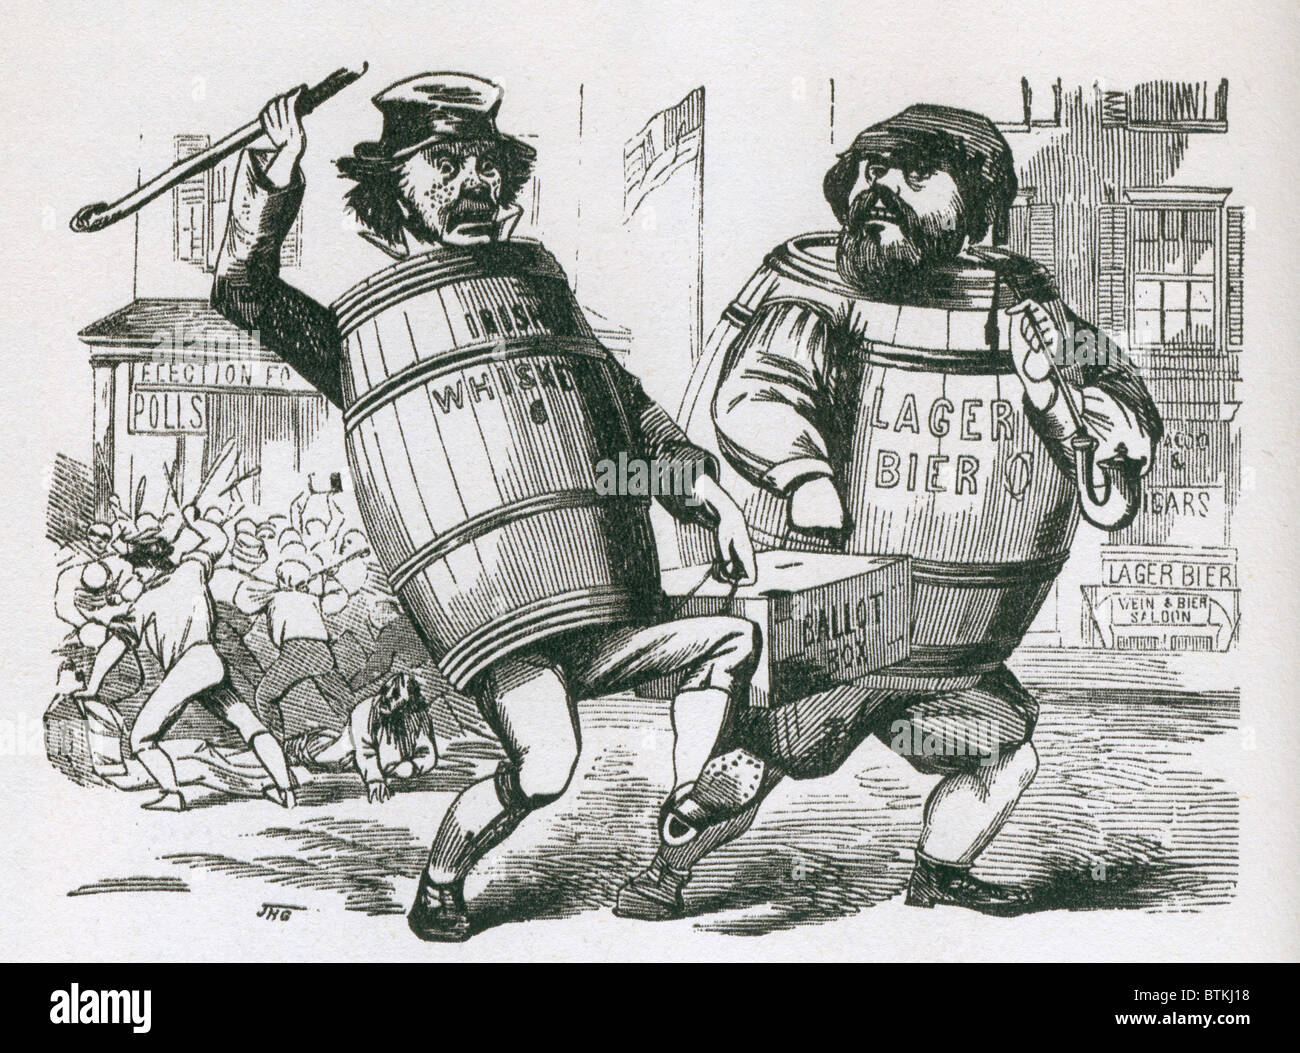 Anti-Immigrant cartoon showing two men with barrels as bodies, labeled 'Irish Wiskey' and 'Lager Bier', carrying a ballot box. In the background is a rioting crowd at a polling place. Nativism, a social and political movement that opposed immigration of Catholic Irish, non-Protestants, and non-English speaking peoples. Ca. 1850. Stock Photo